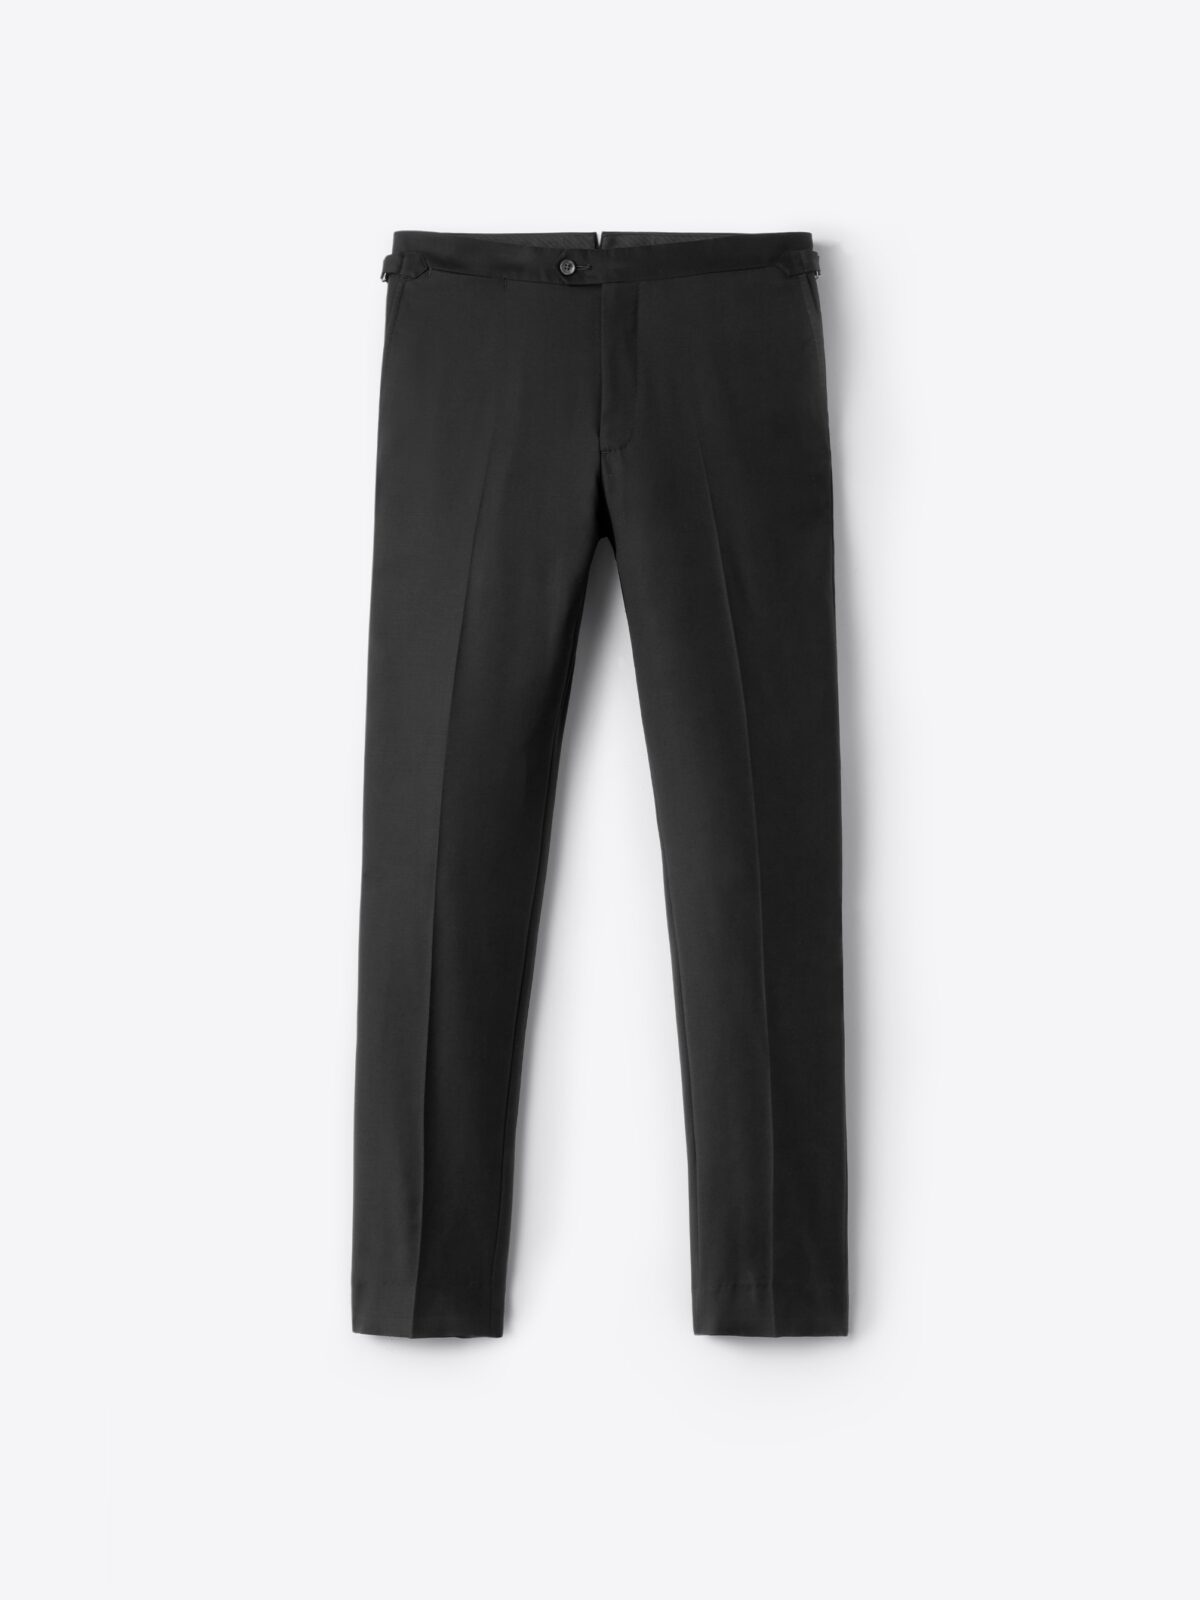 Buy U.S. Polo Assn. U.S. Polo Assn. Tailored Men Black Slim Fit Solid Formal  Trousers at Redfynd